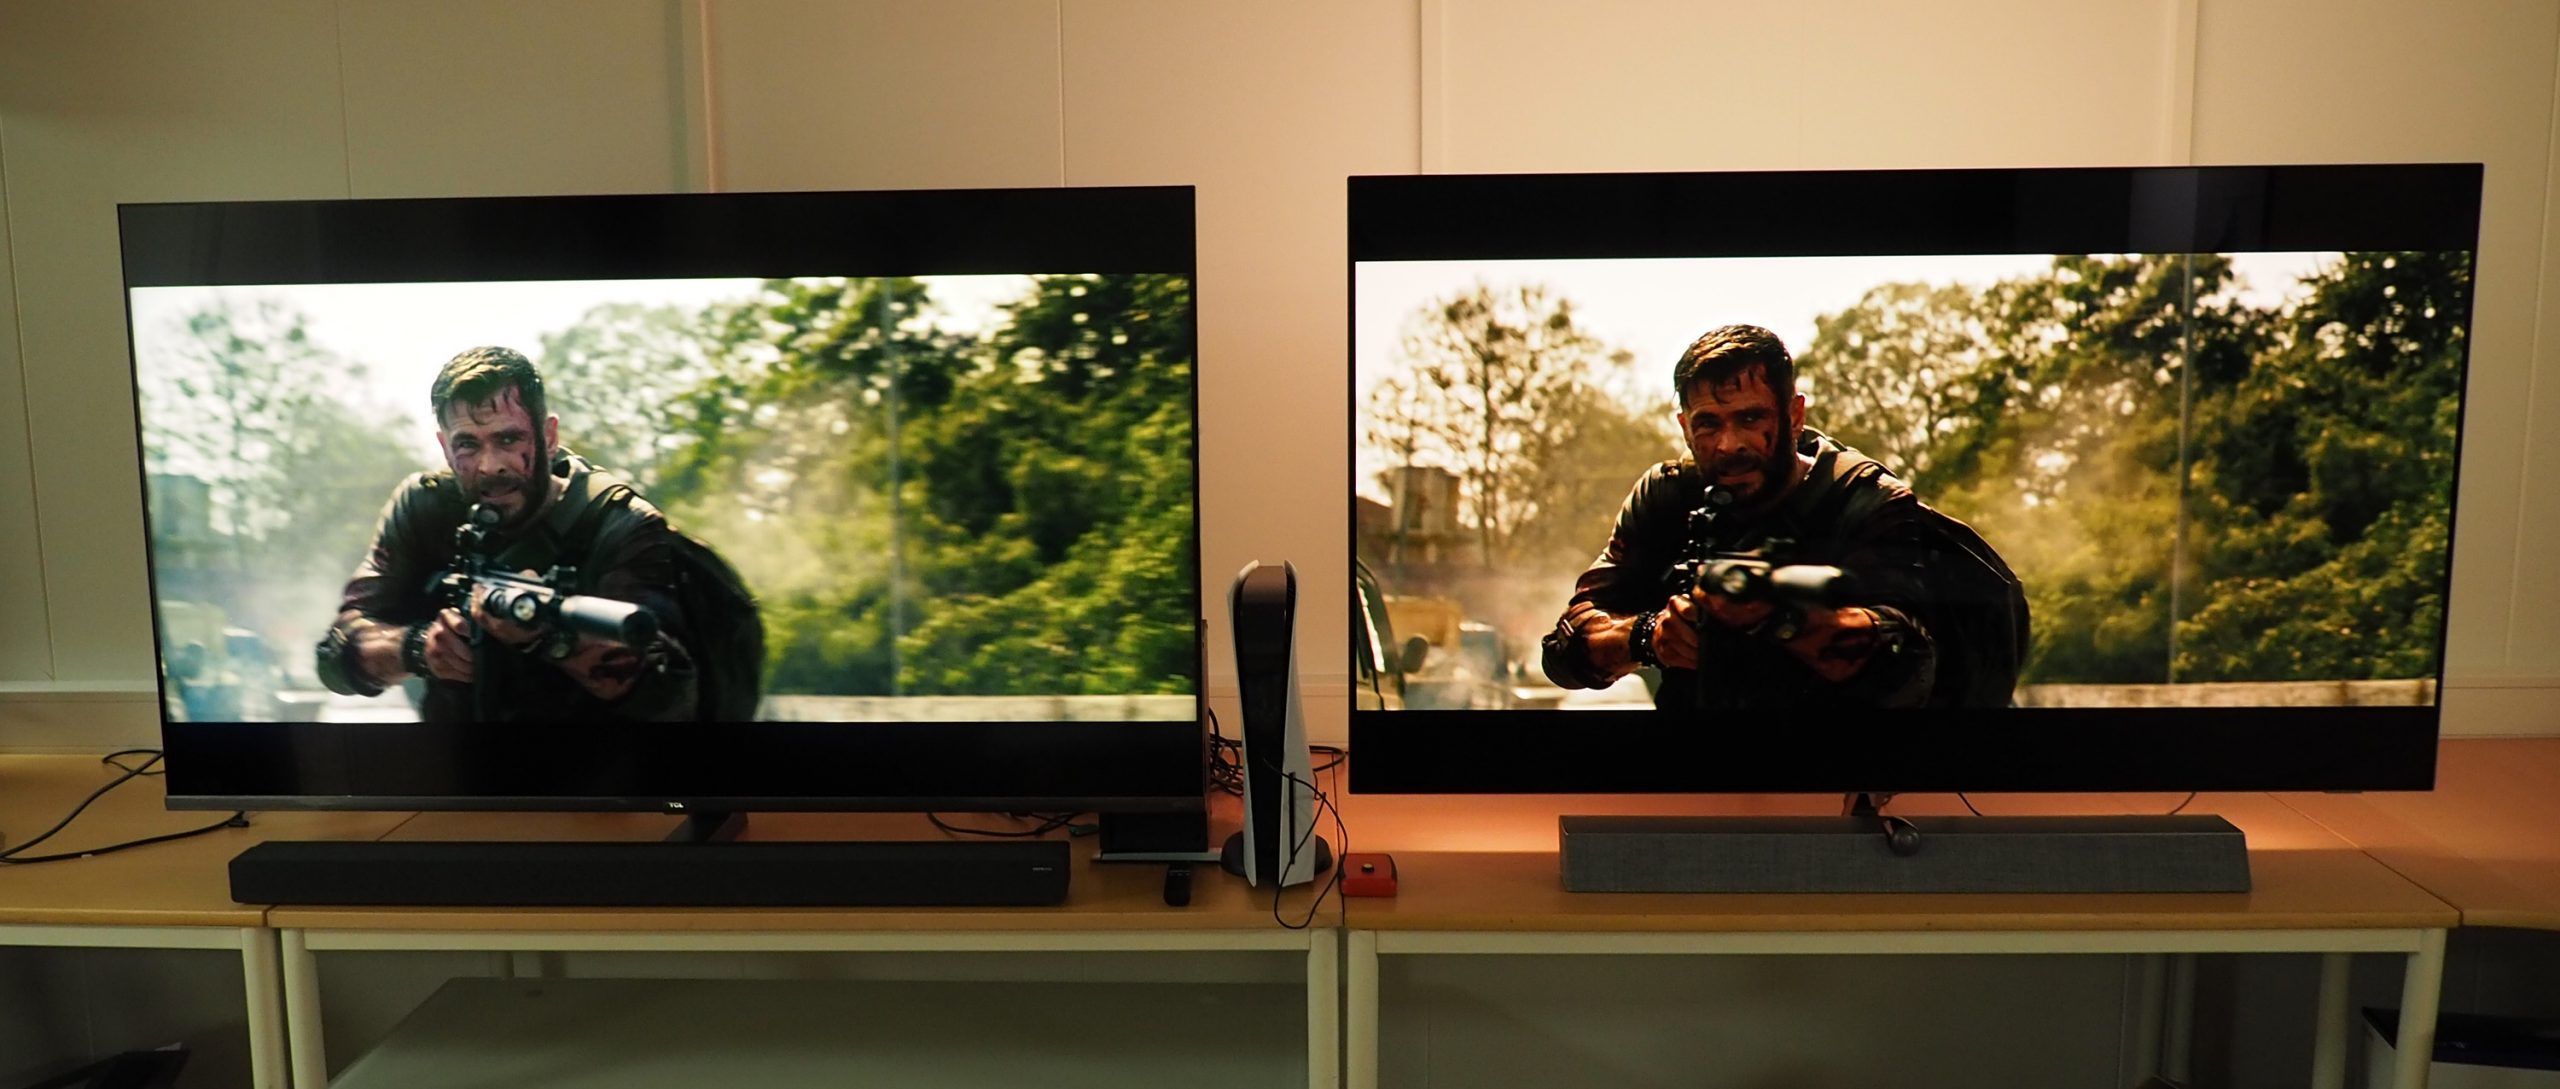 TCL X10 vs Philips OLED935 scaled